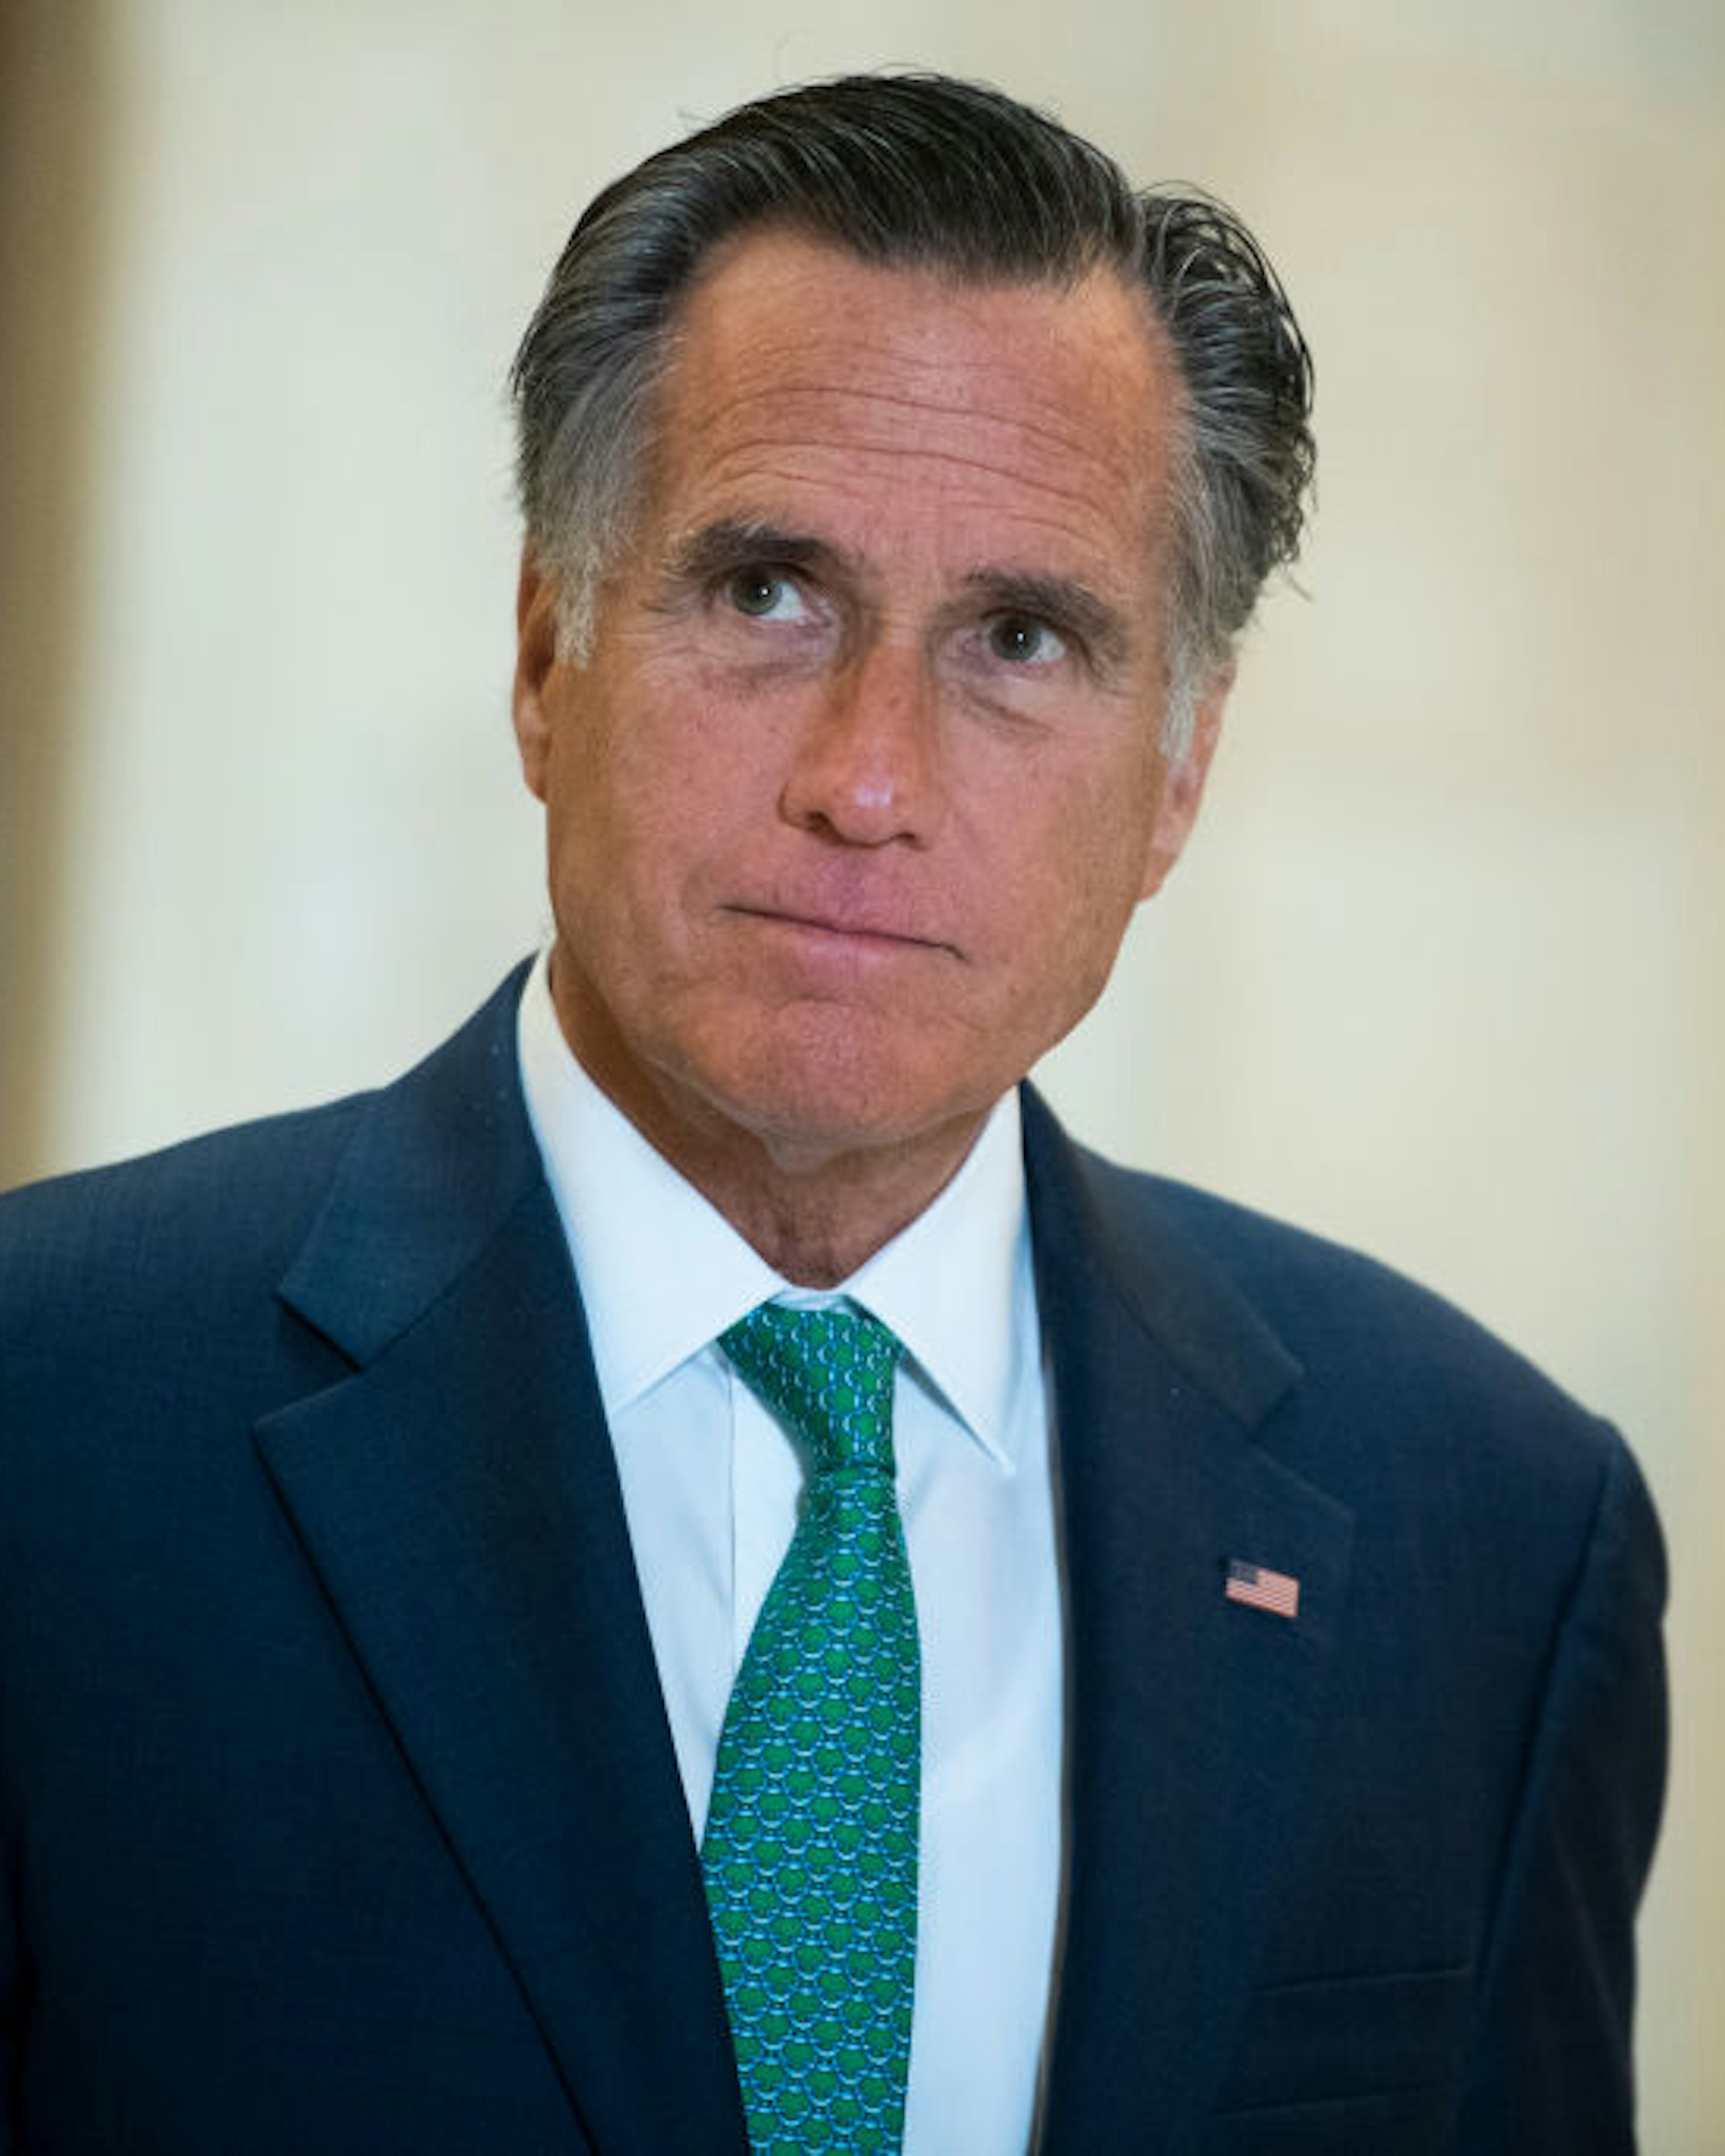 UNITED STATES - MARCH 17: Sen. Mitt Romney, R-Utah, leaves the Senate Republican Policy luncheon in Russell Building on Tuesday, March 17, 2020. Treasury Secretary Steven Mnuchin attended to discuss the coronavirus relief package. (Photo By Tom Williams/CQ-Roll Call, Inc via Getty Images)